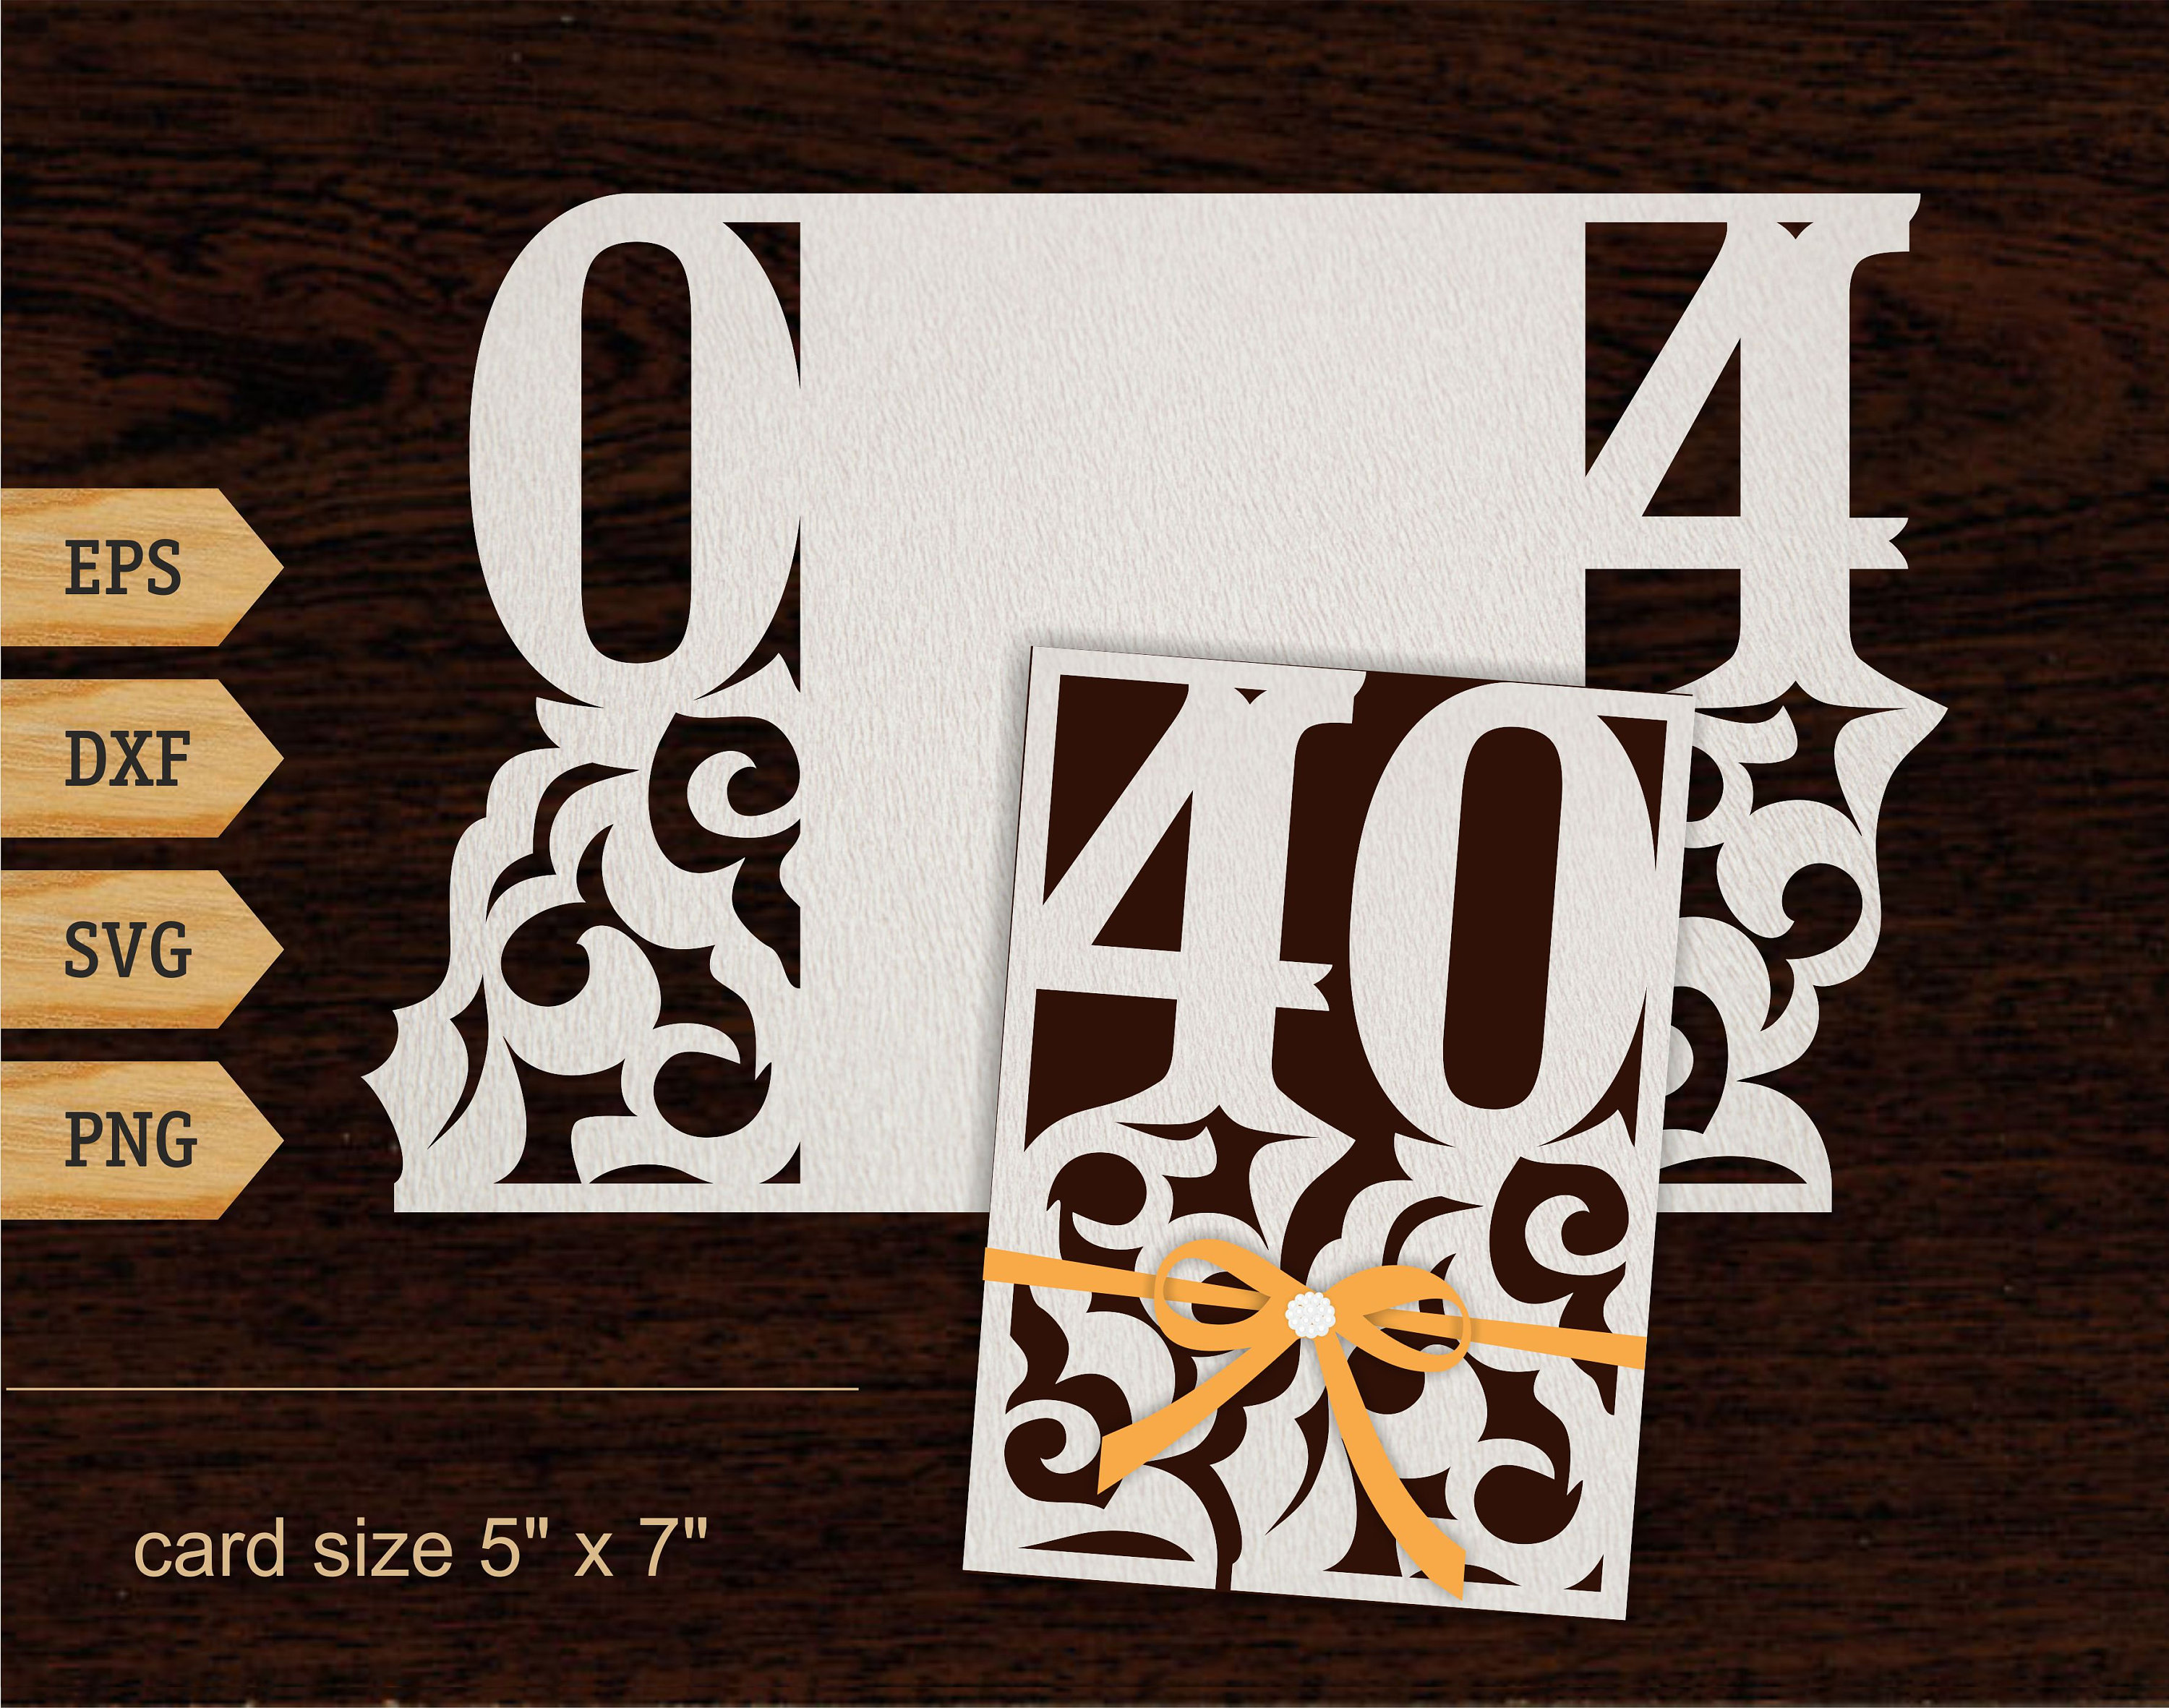 Download 40th birthday svg 40 Years Card 5x7 svg dxf 40th | Etsy